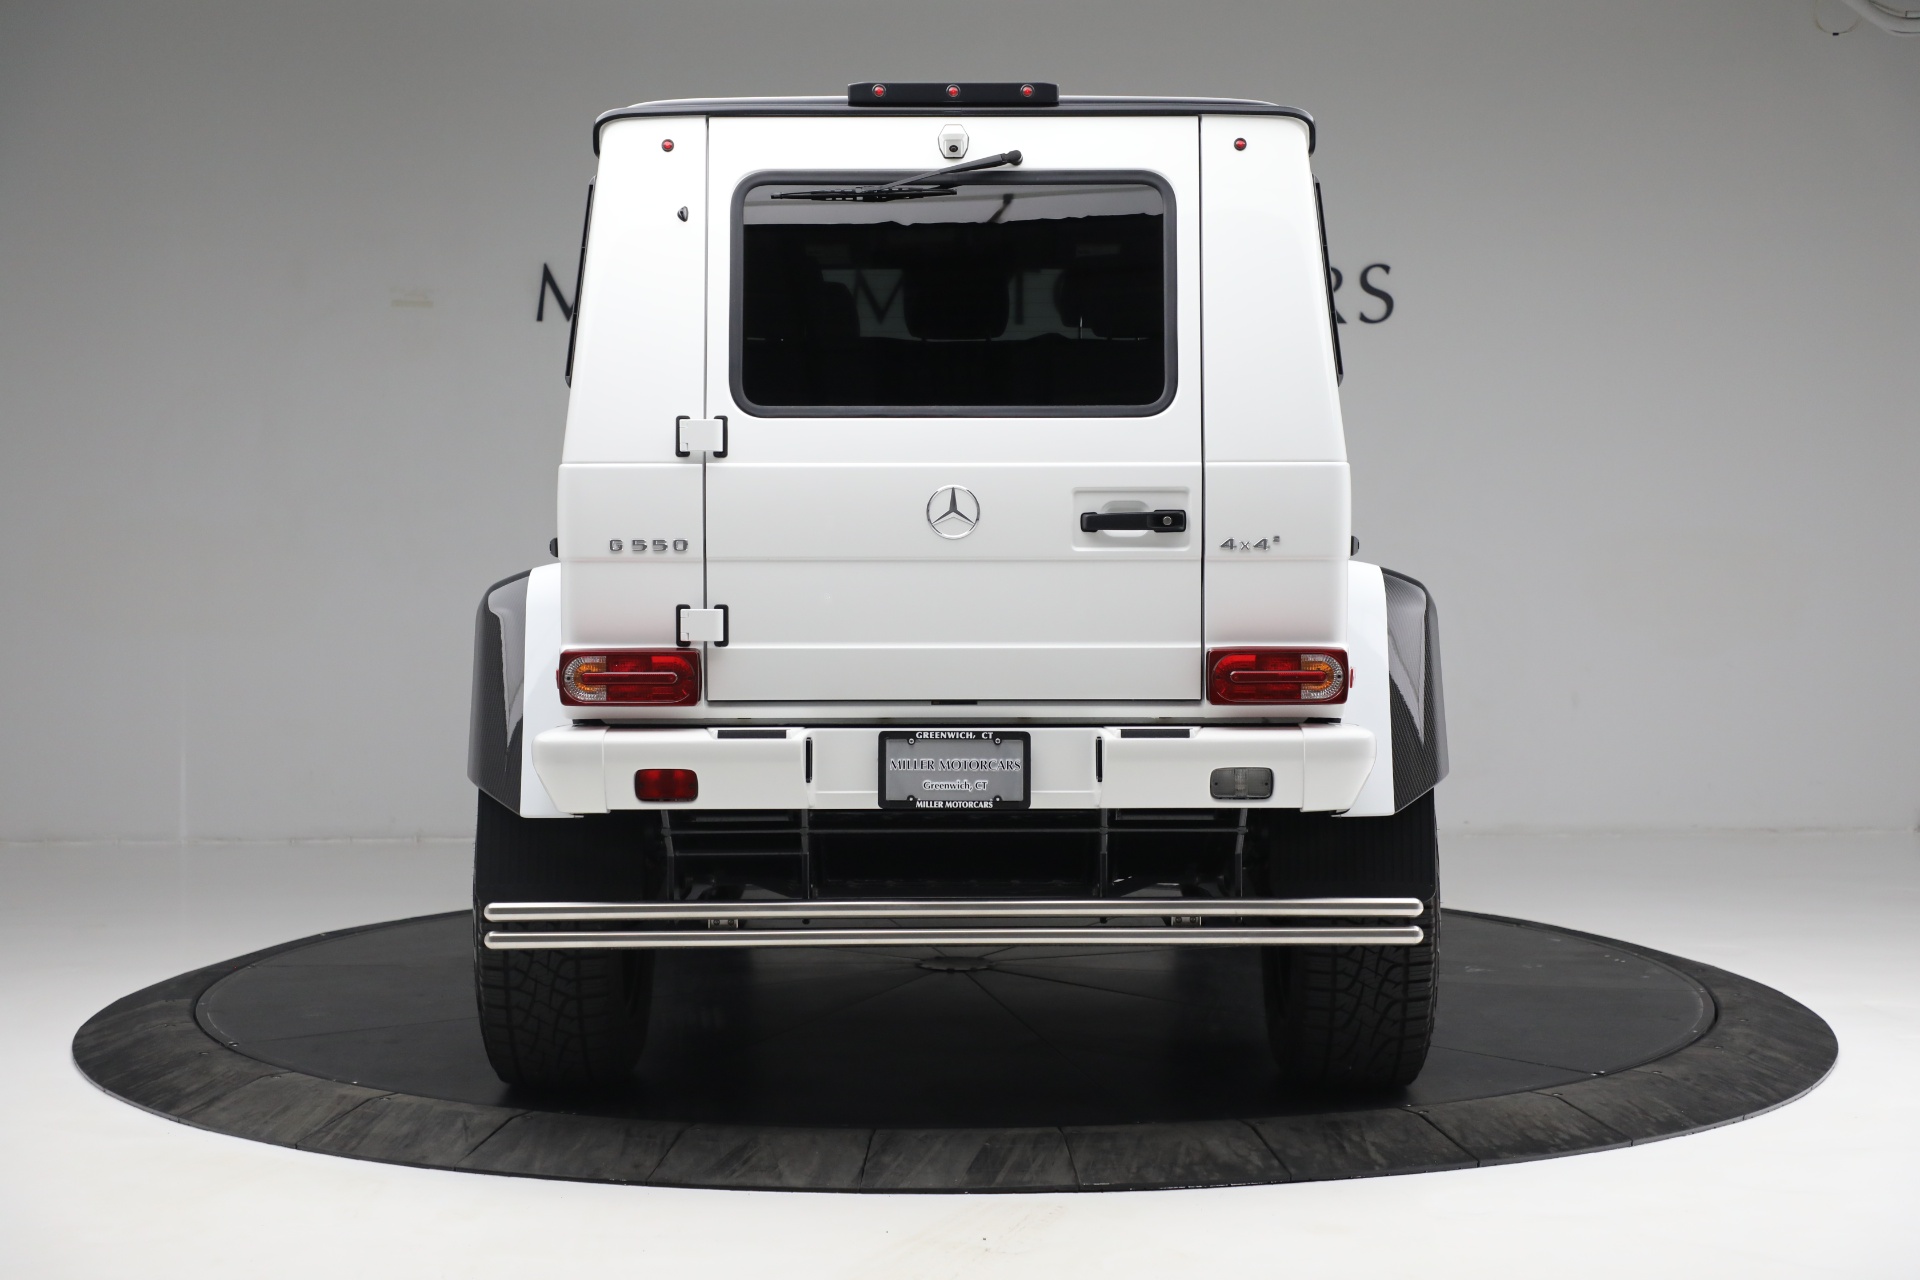 Used 2017 Mercedes Benz G Class G 550 4x4 Squared